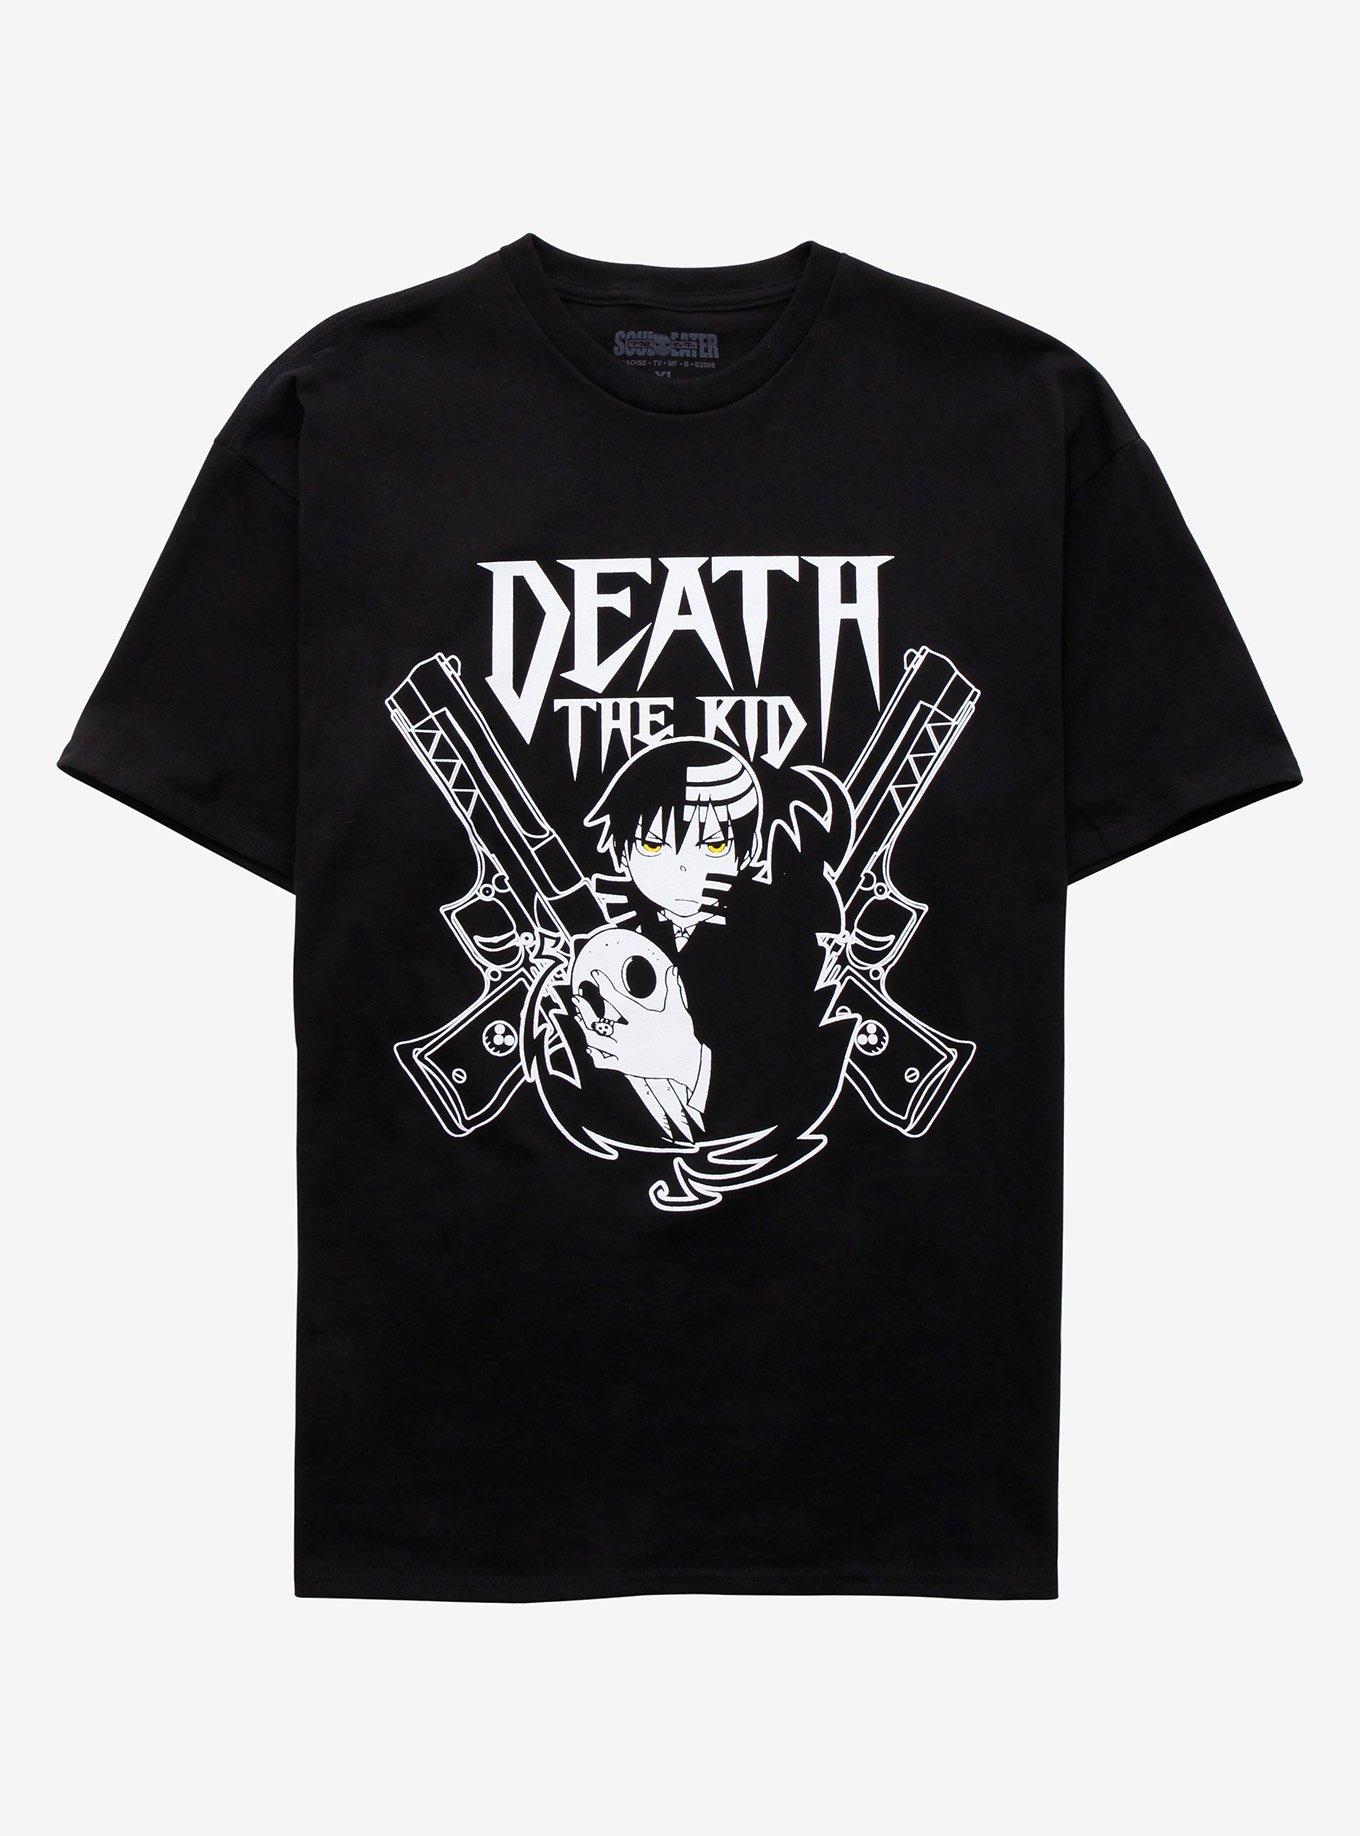 Soul Eater Death The Kid & Pistols T-Shirt | Hot Topic